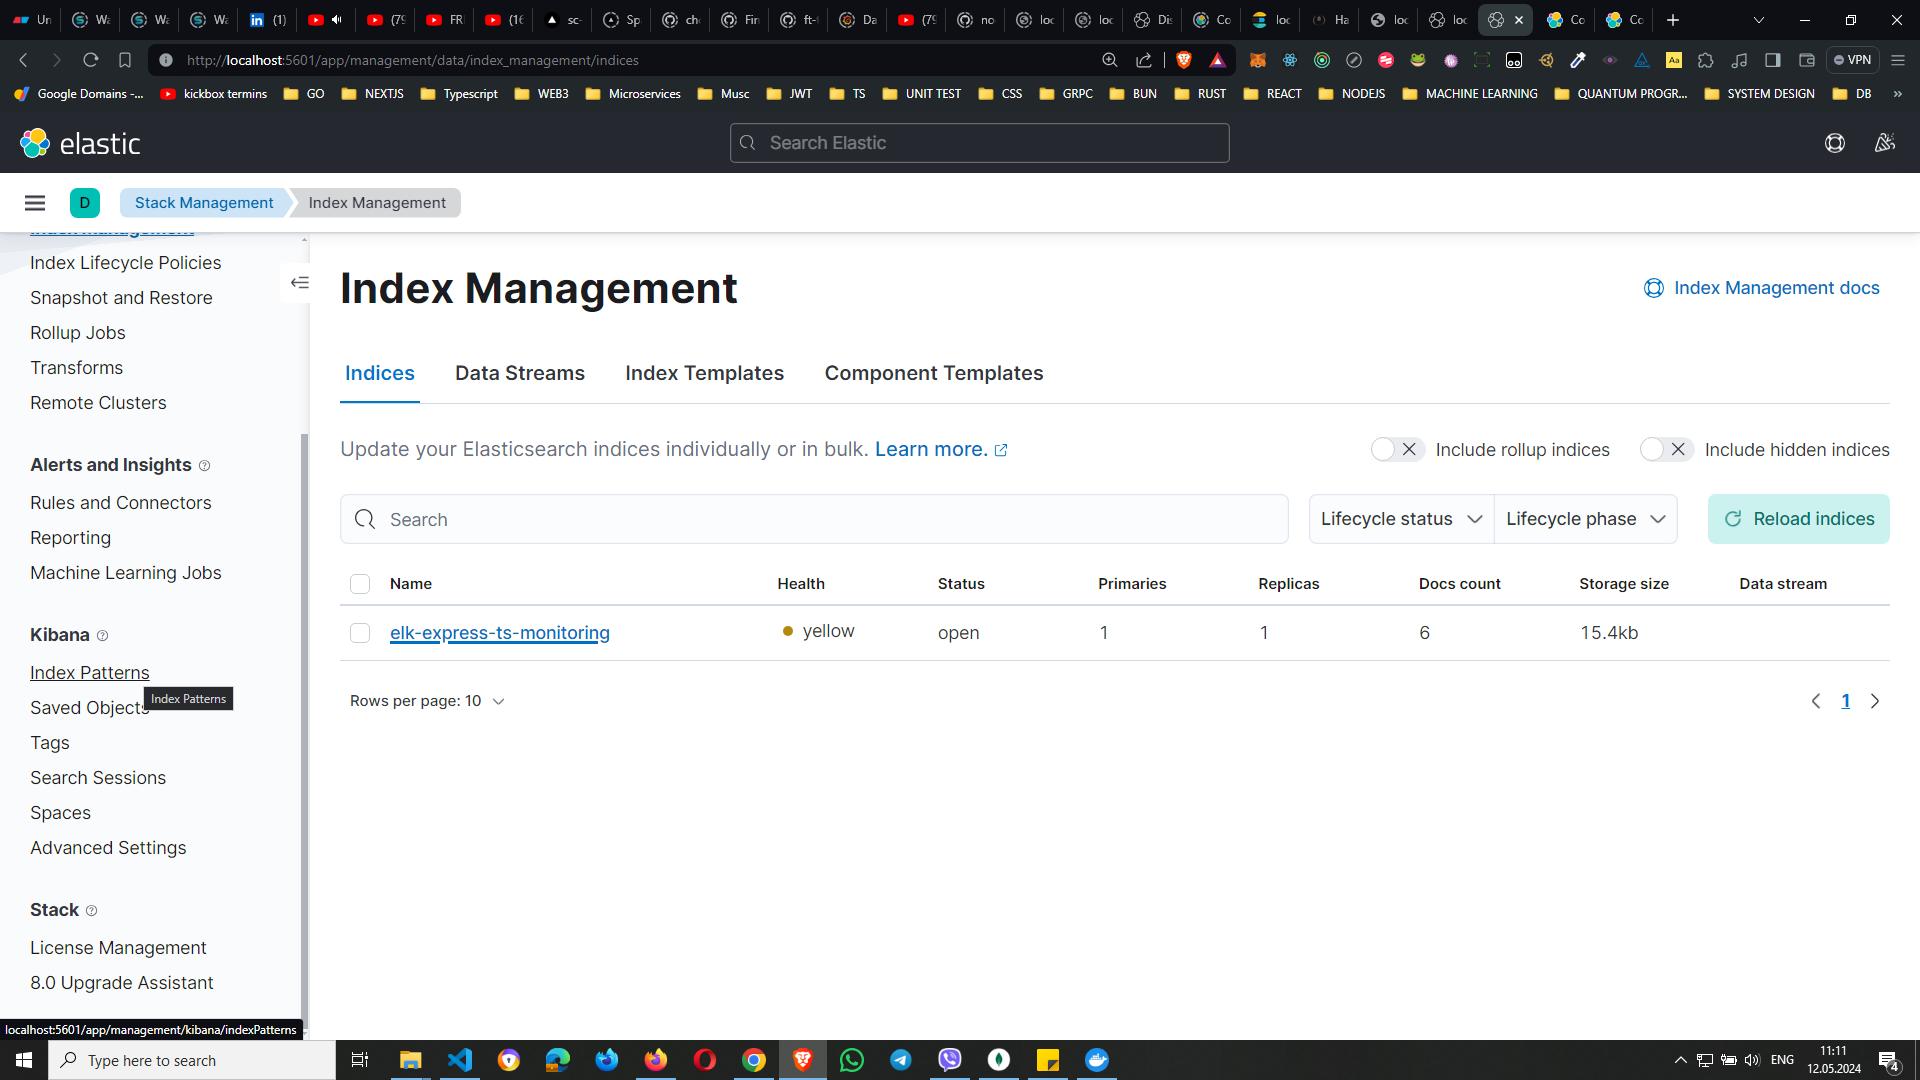 Screenshot of Elastic interface showing the `Index Management` page with details of the indices, including name, health status, primary and replica counts, document count, and storage size.